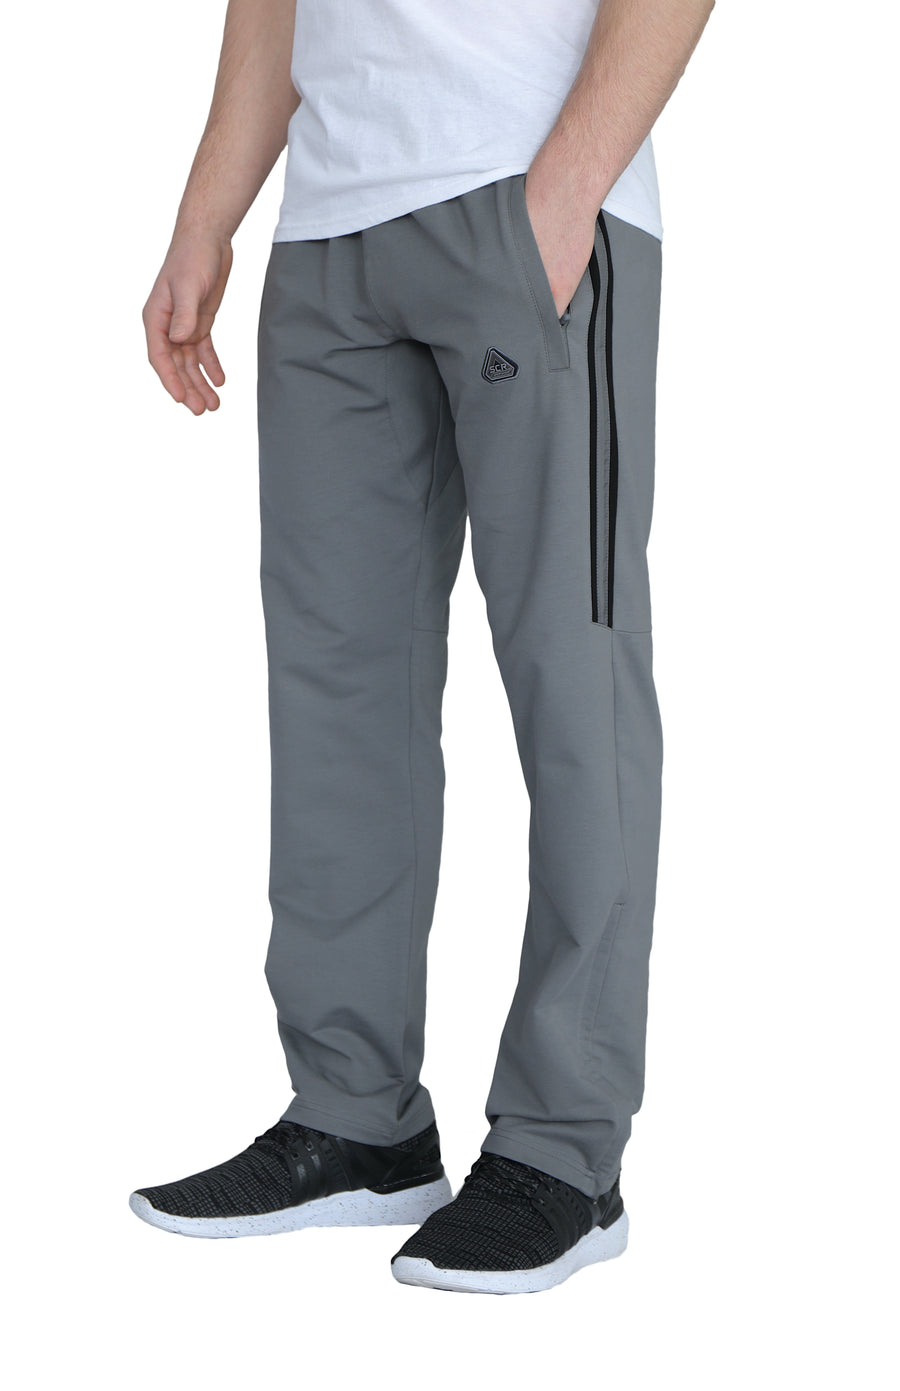 SCR SPORTSWEAR Men's All Day Comfort Tappered Slim Sweatpants  Athletic-Casual Lounge Pants Mens Running Joggers for Men (36W x 30L, Dark  Grey-K536)